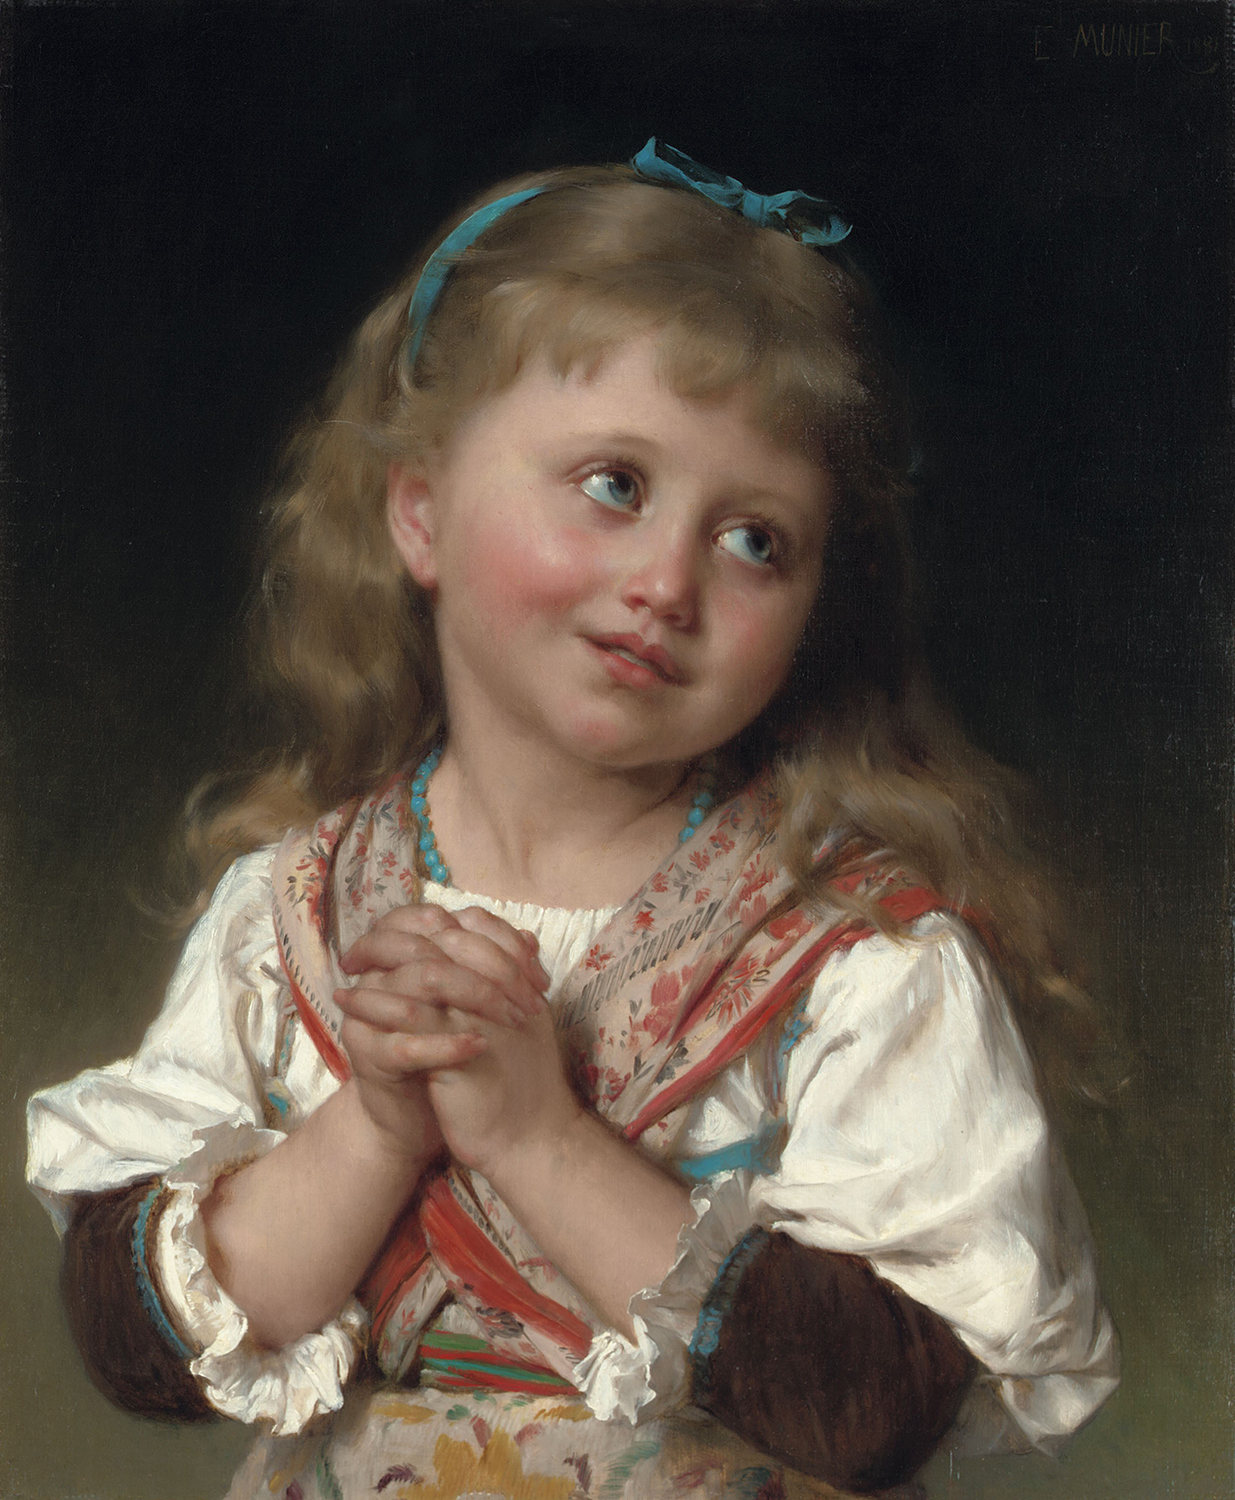 A youjng girl with her hands folded